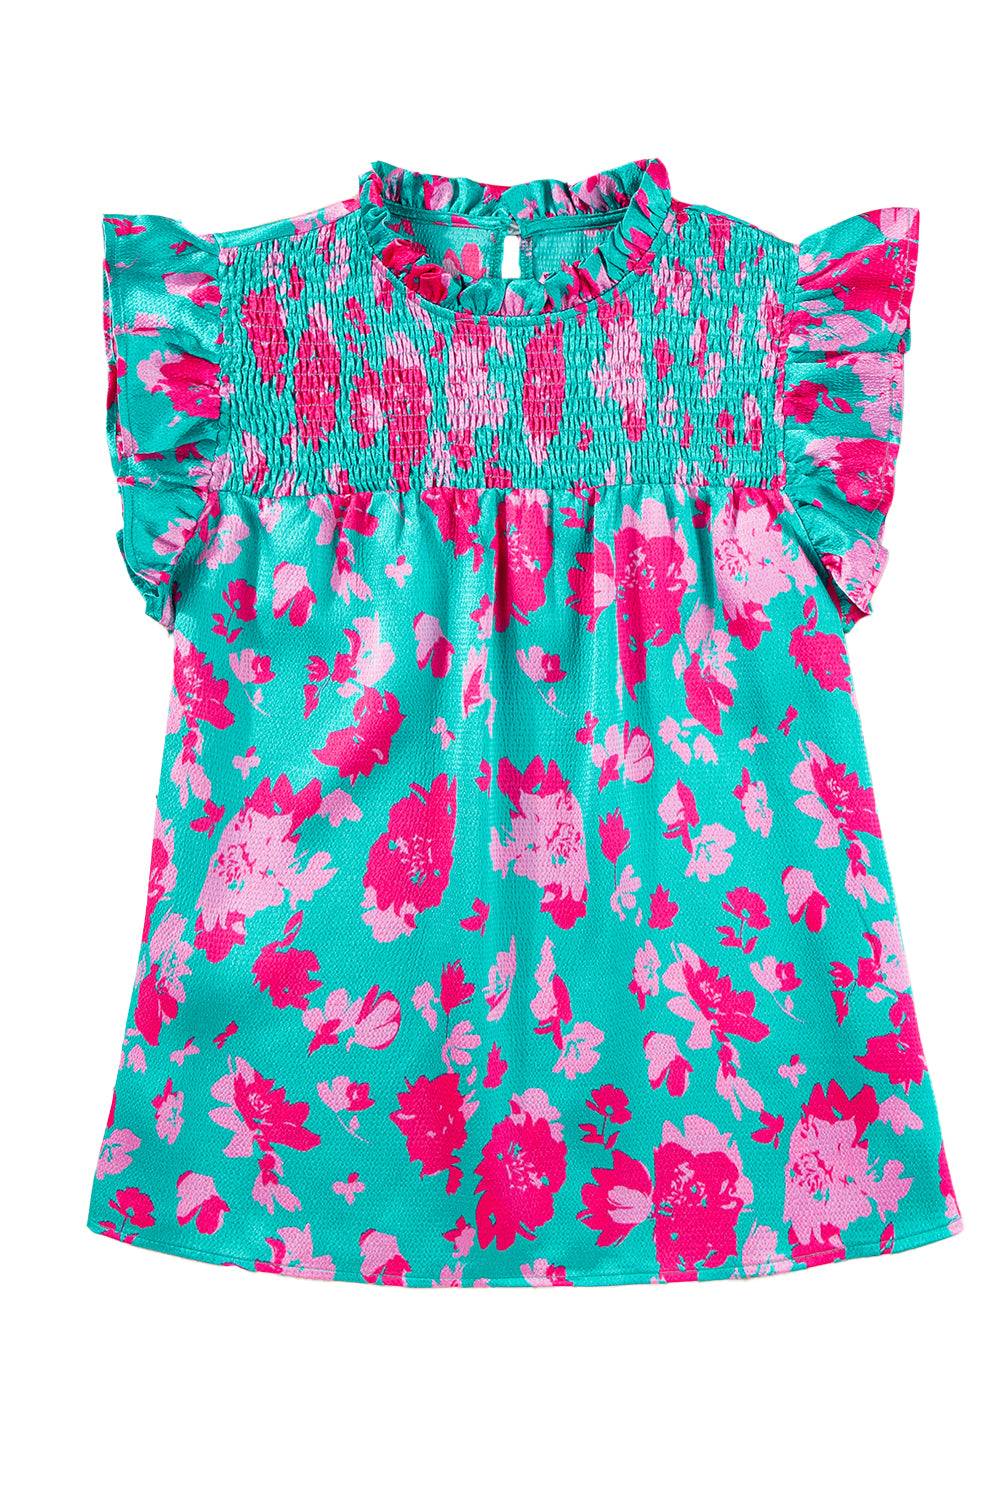 a girl's top with pink and blue flowers on it